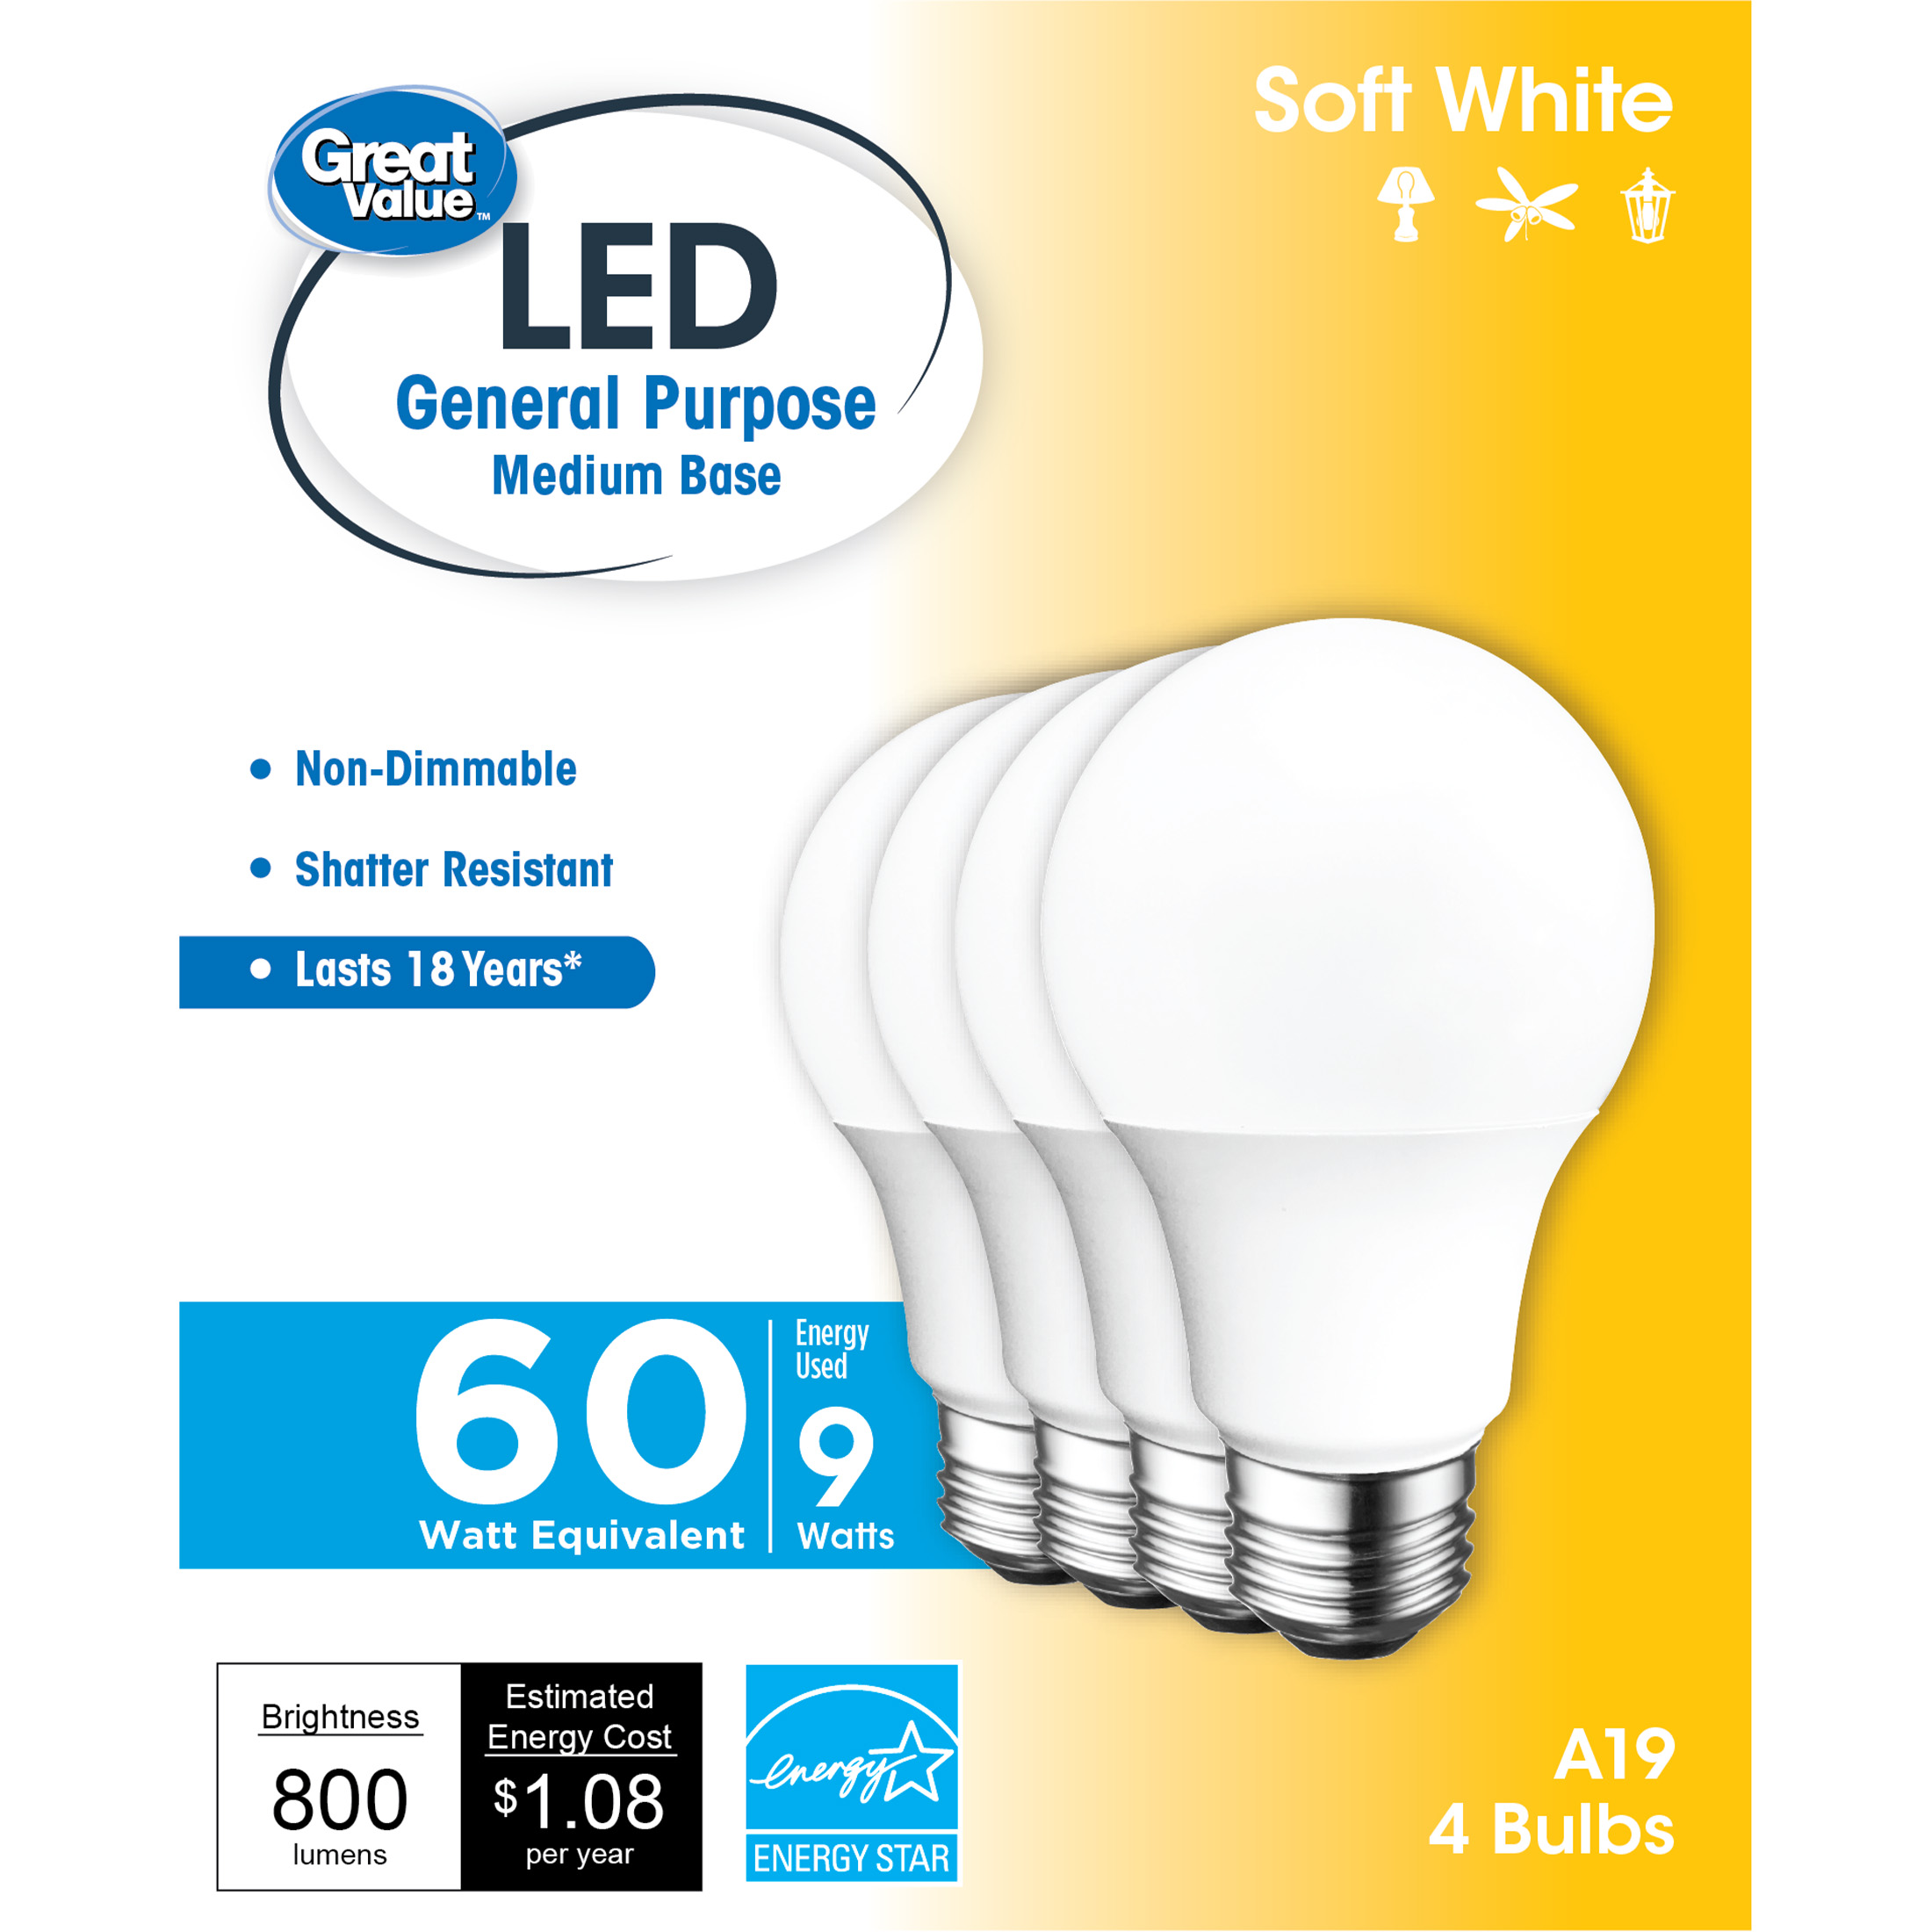 Great Value LED Light Bulb, 9W (60W Equivalent) 18Y, A19 General Purpose Lamp E26 Medium Base, Non-dimmable, Soft White, 4-Pack - image 1 of 8